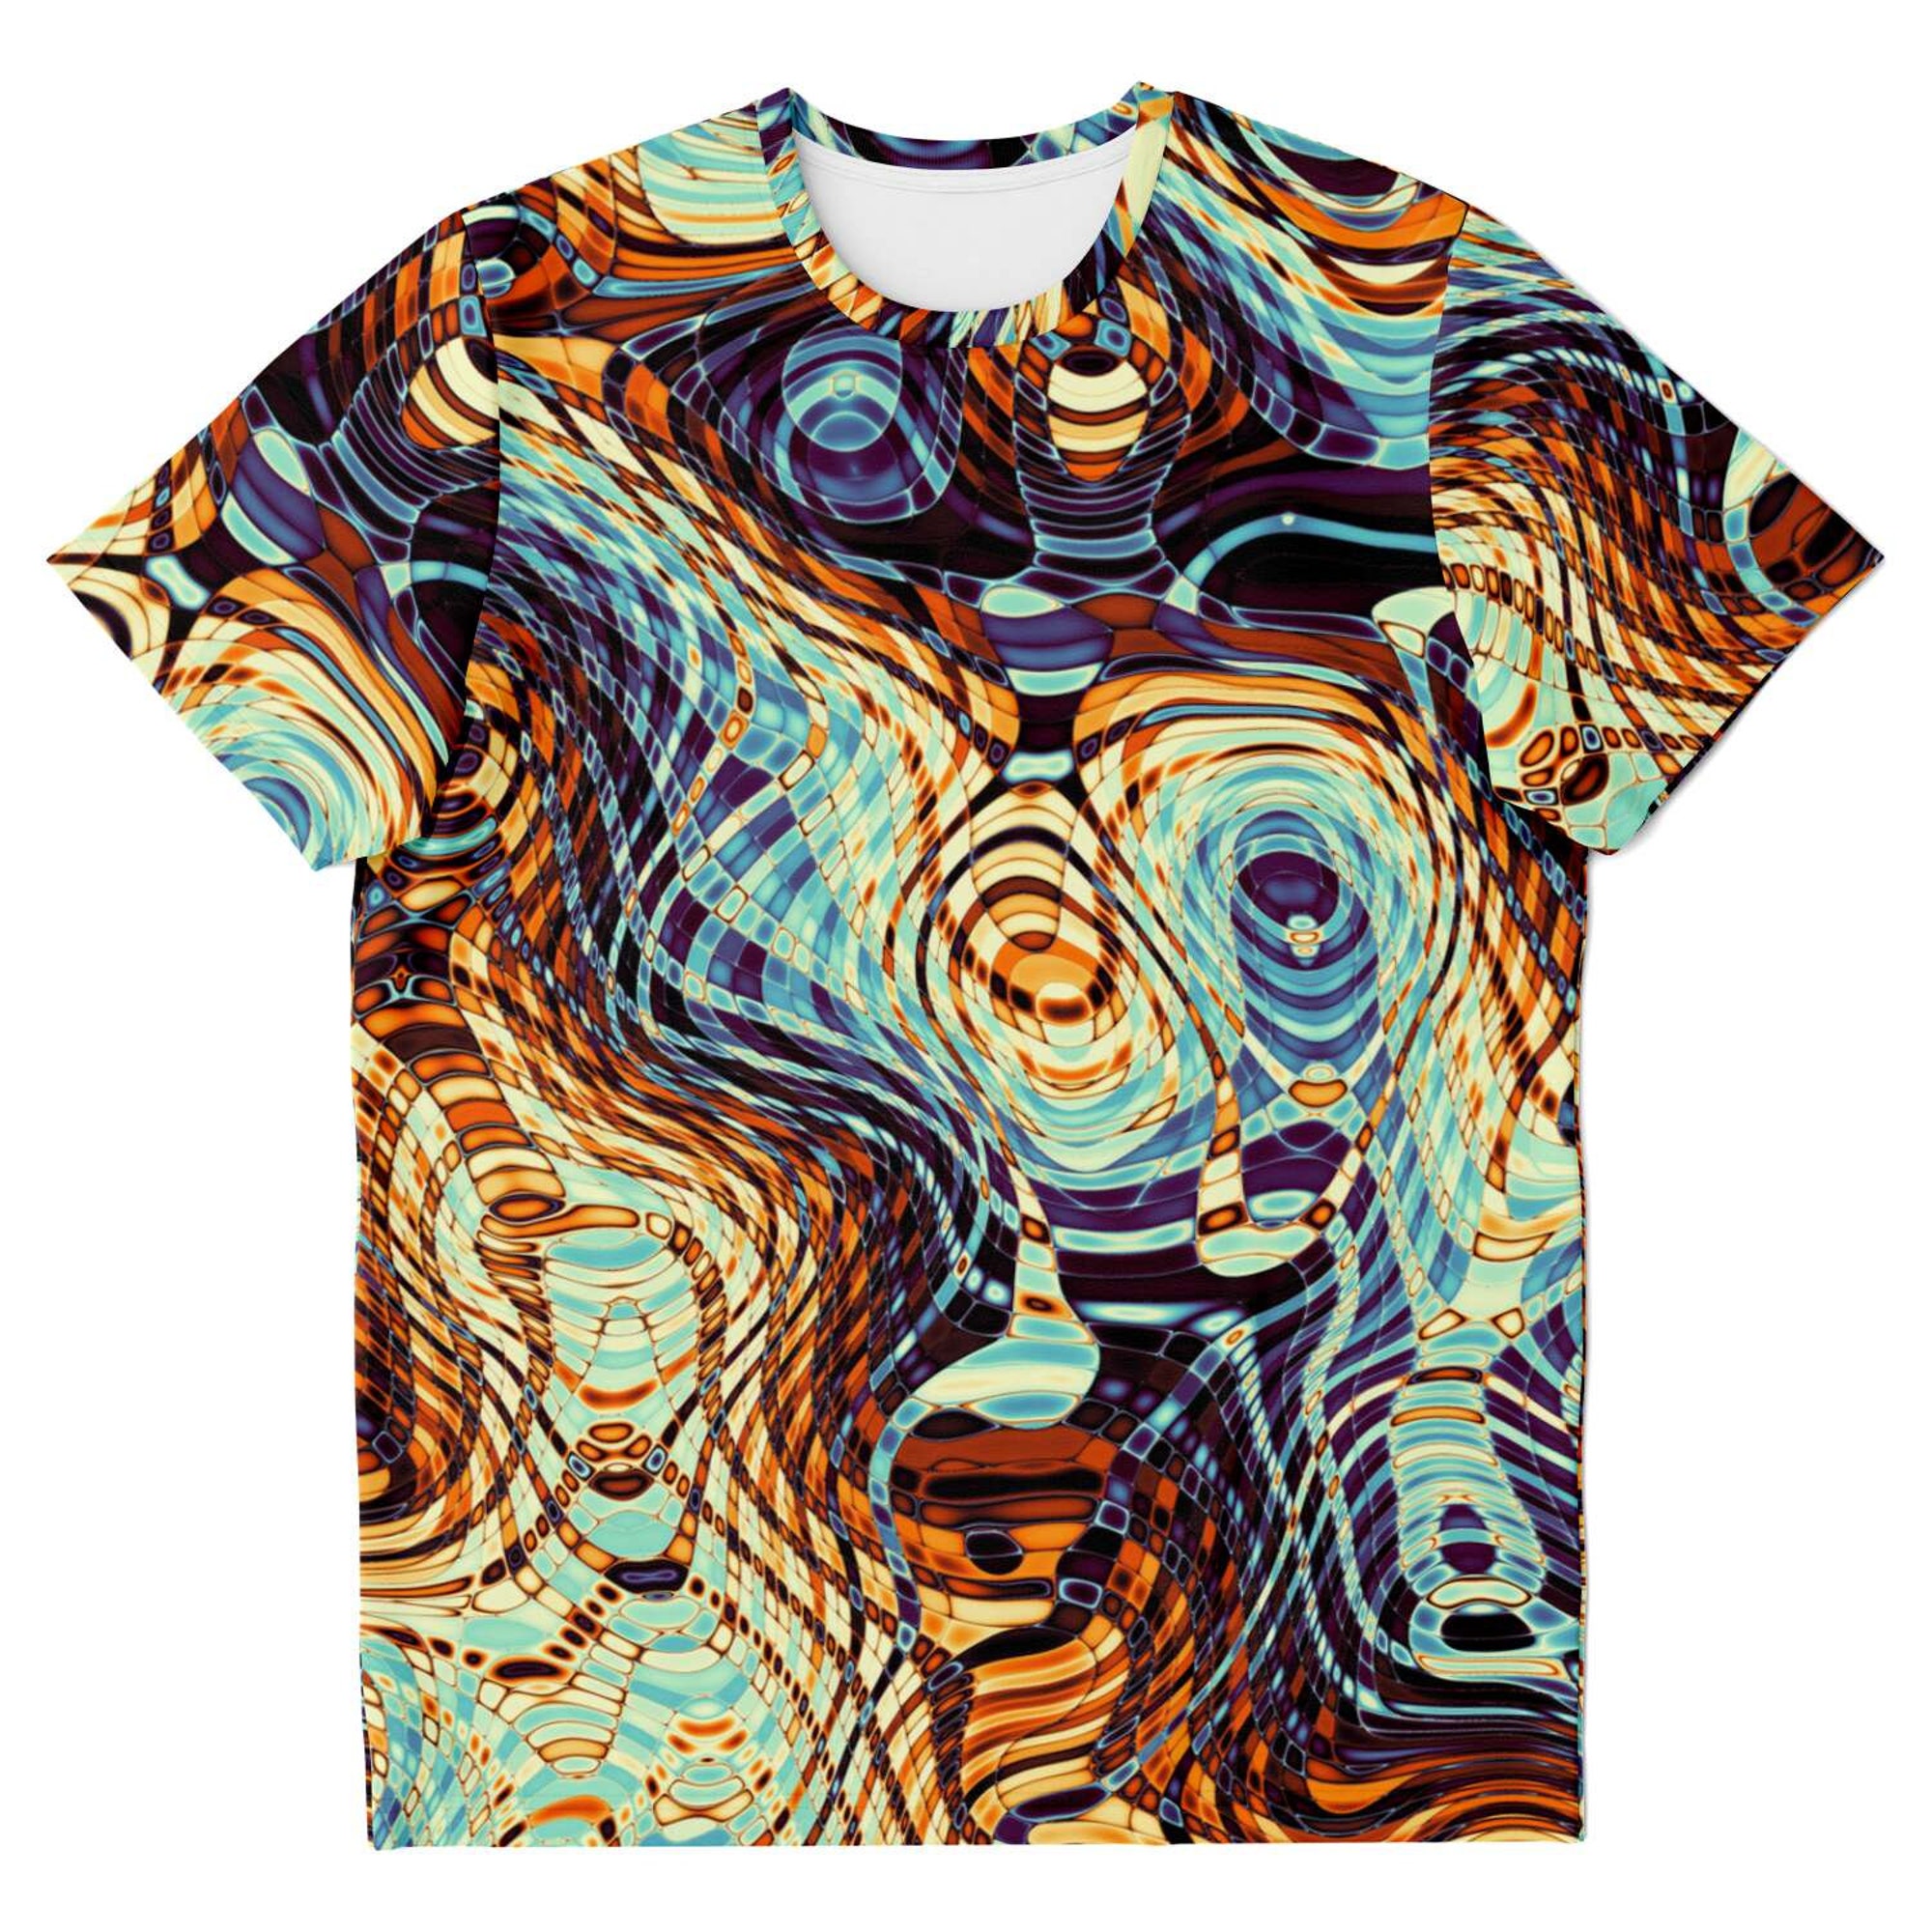 Discover Abstract Shapes Strings Stripes Grunge Psychedelic 3D T Shirt